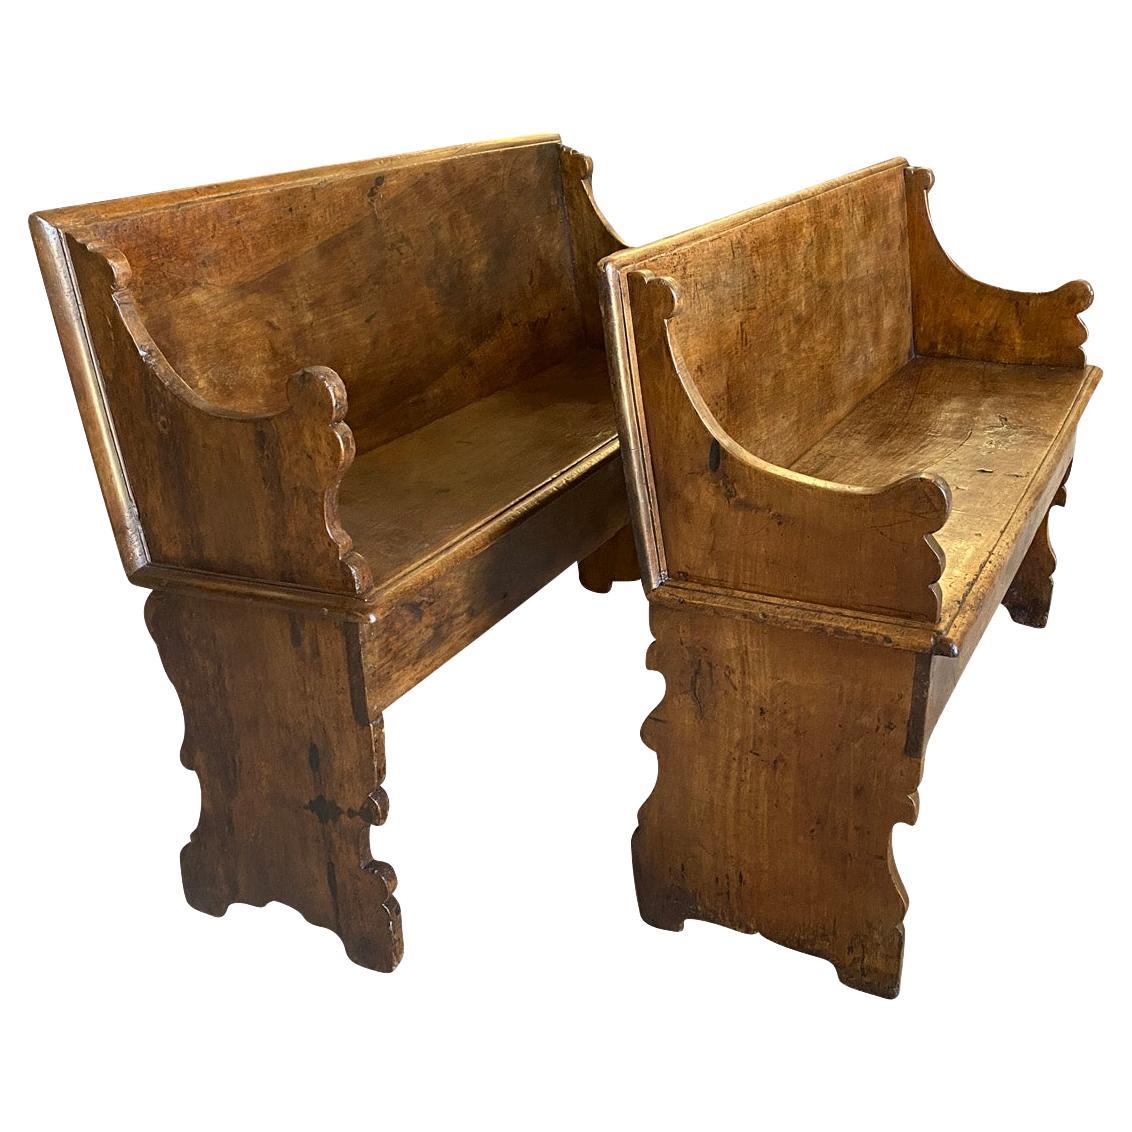 A wonderful pair of 18th century benches from Bologna, Italy. Beautifully constructed from handsome walnut with solid board backs & seats and wonderfully sculpted arms and legs. One bench measures 39